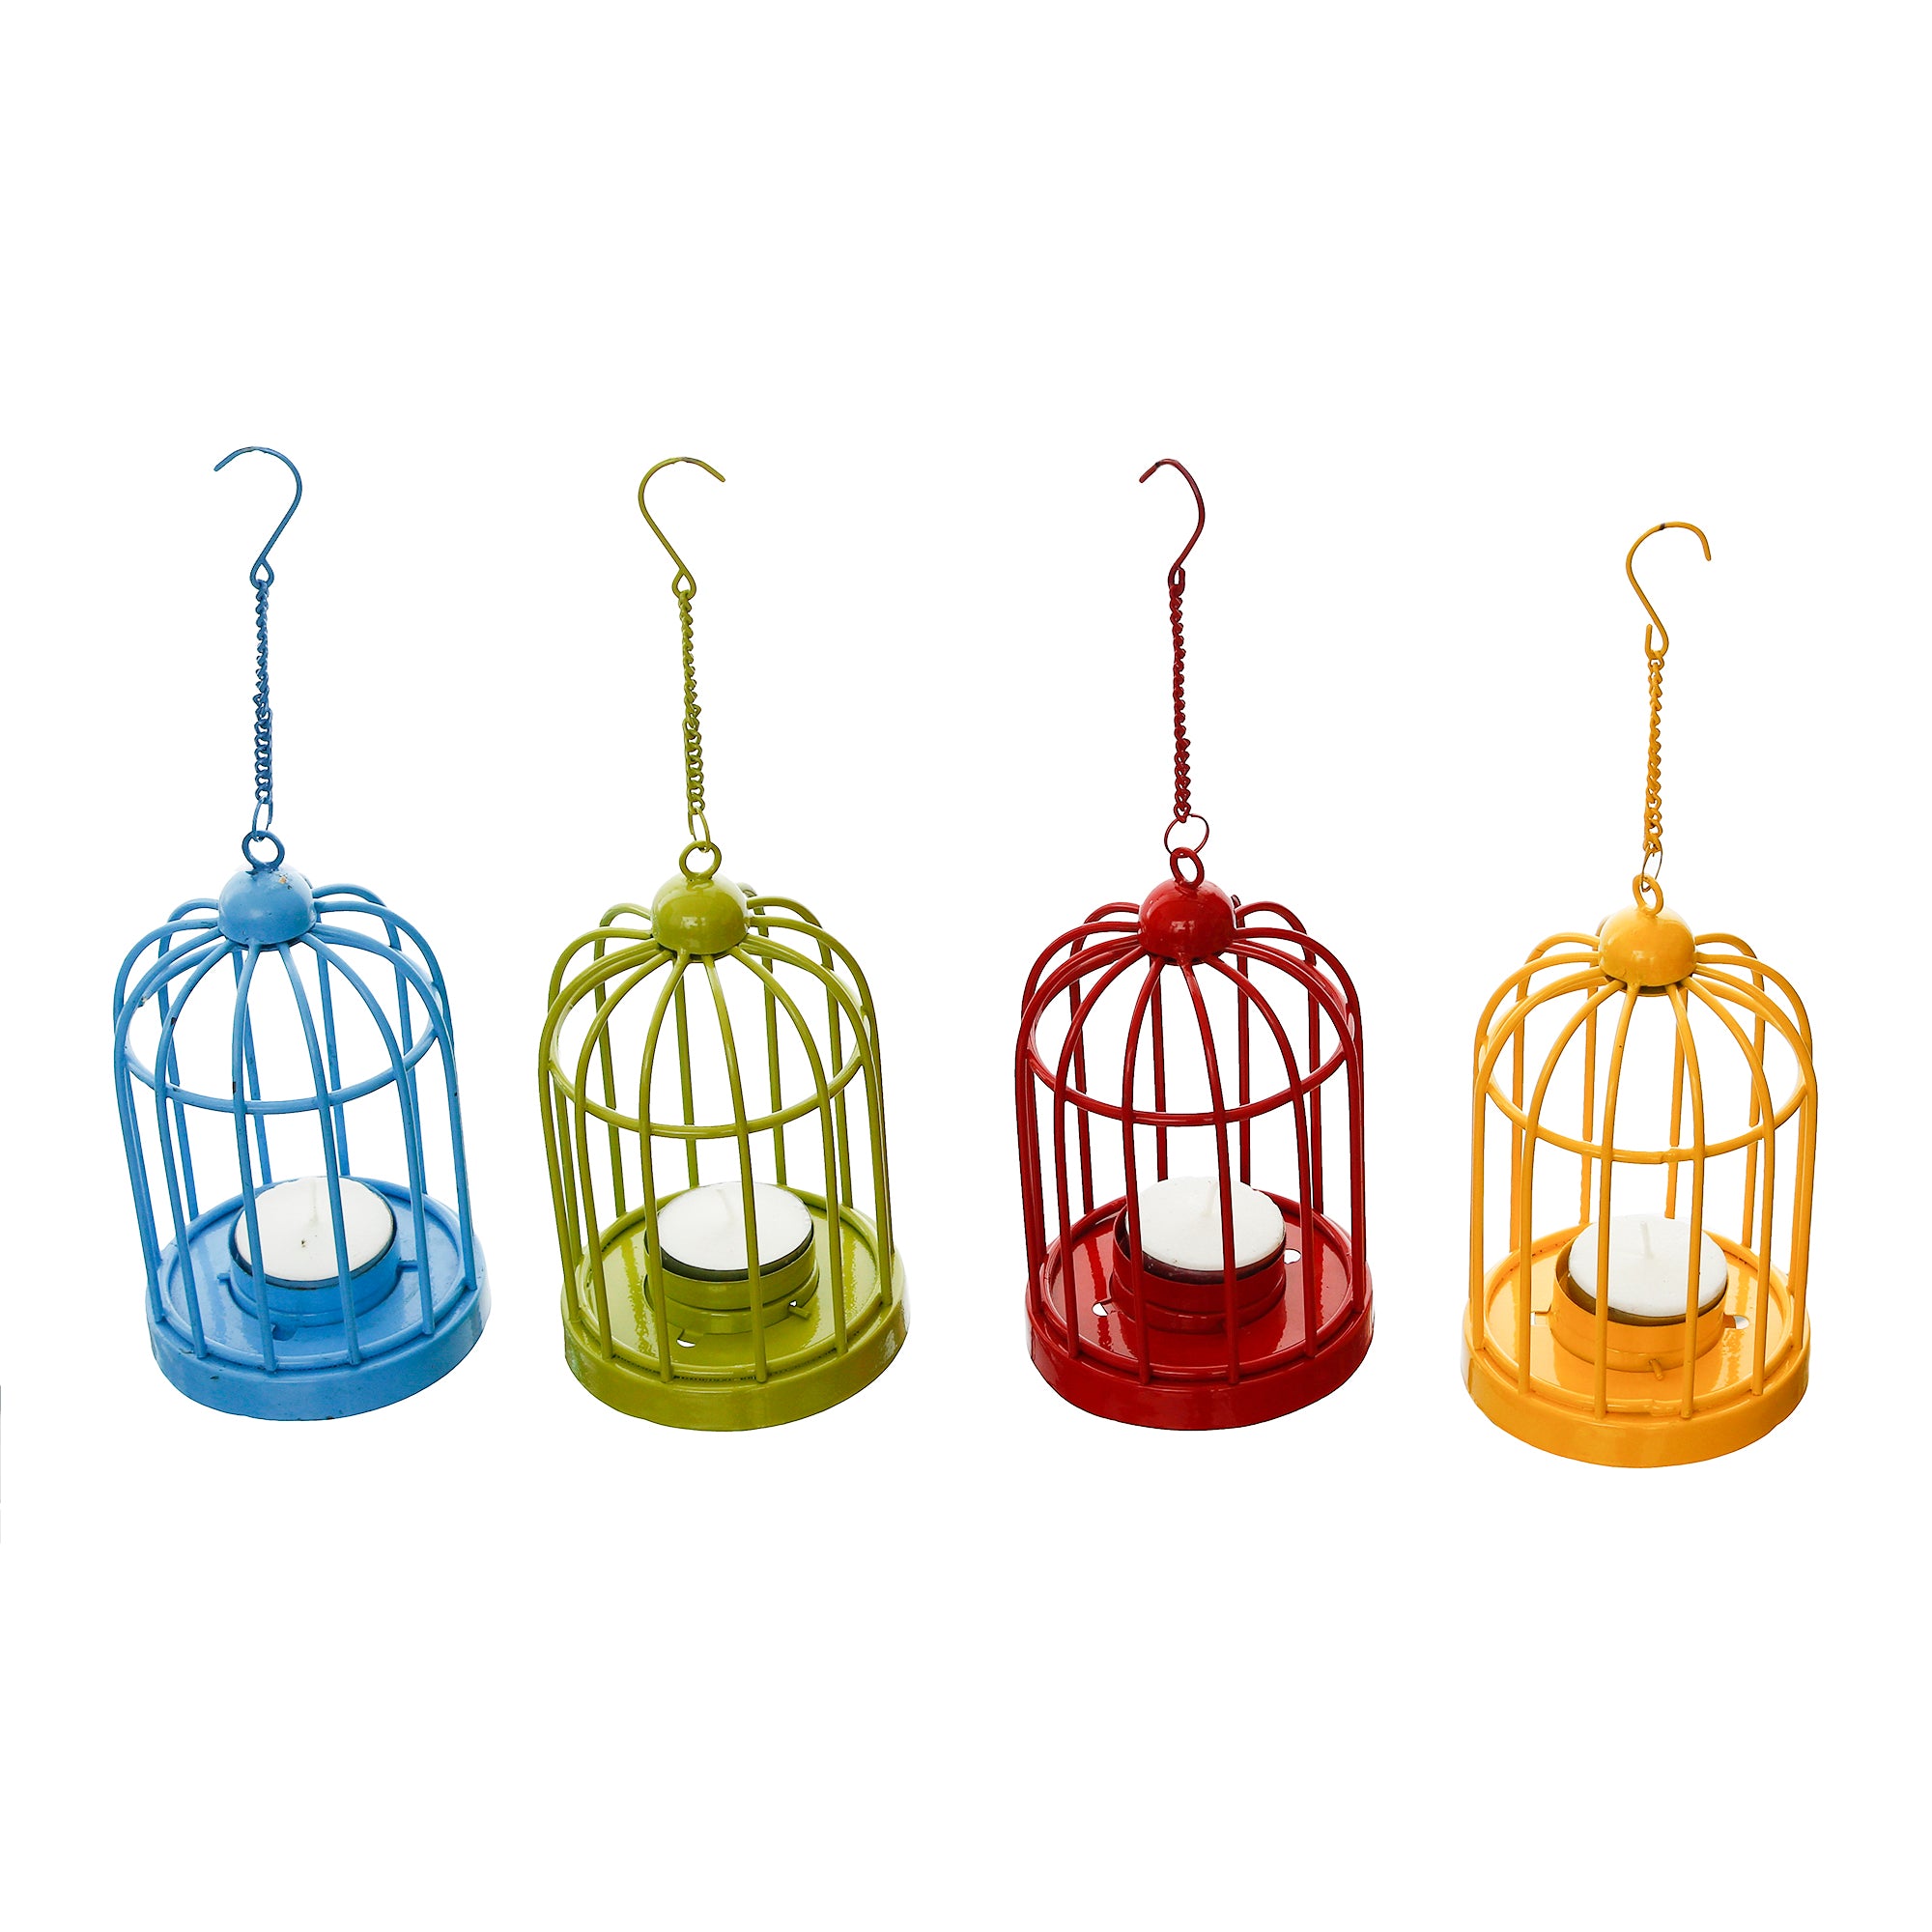 Set of 4 Colors Iron Cage Tea Light candle Holder With Hanging Chain(Blue, Green, Yellow, Red) 4